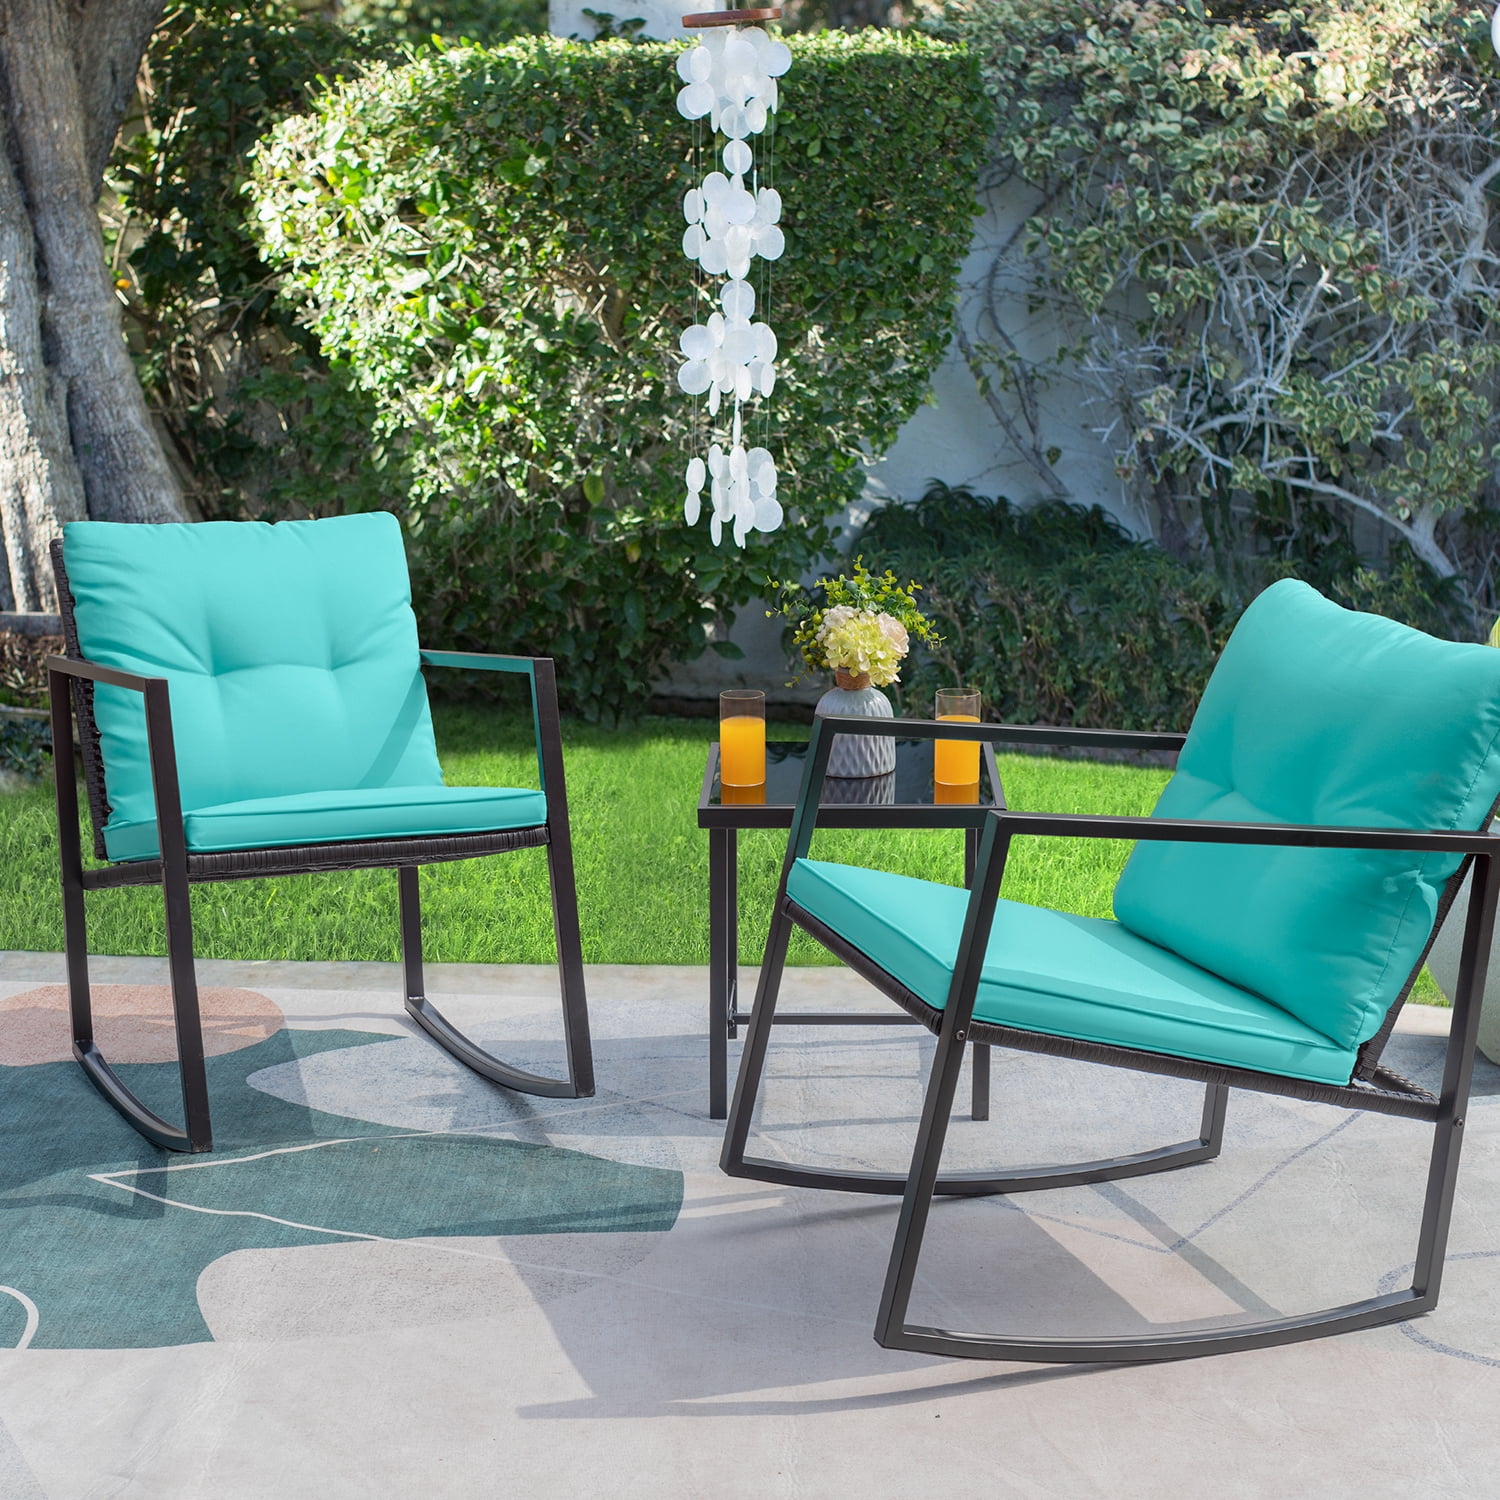 Turquoise Furnivilla 3 Piece Patio Furniture Set Bistro Patio Rocking Set,Outdoor Furniture Porch Chairs Conversation Sets with Coffee Table,Curshion,Back Curshion 